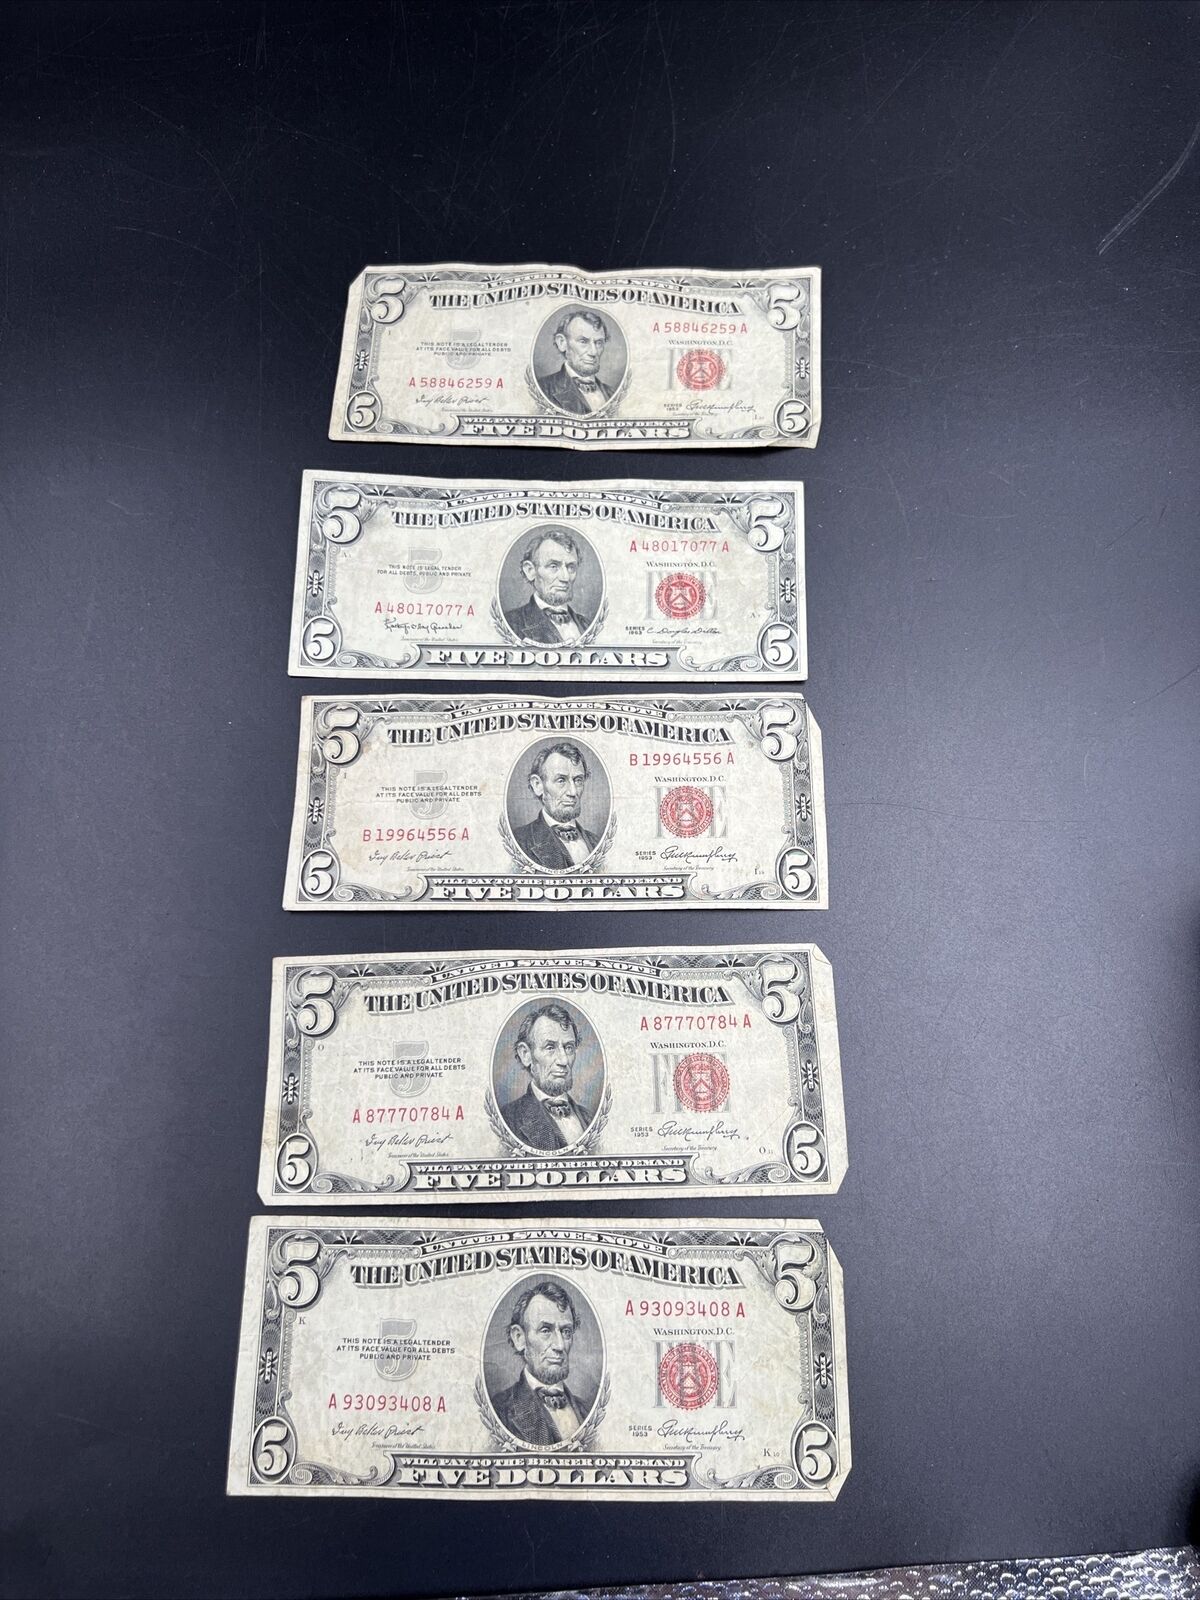 Lot of 5 1953 $5 Five Dollar Red Seal Legal Tender Banknotes US Currency VG+ #08